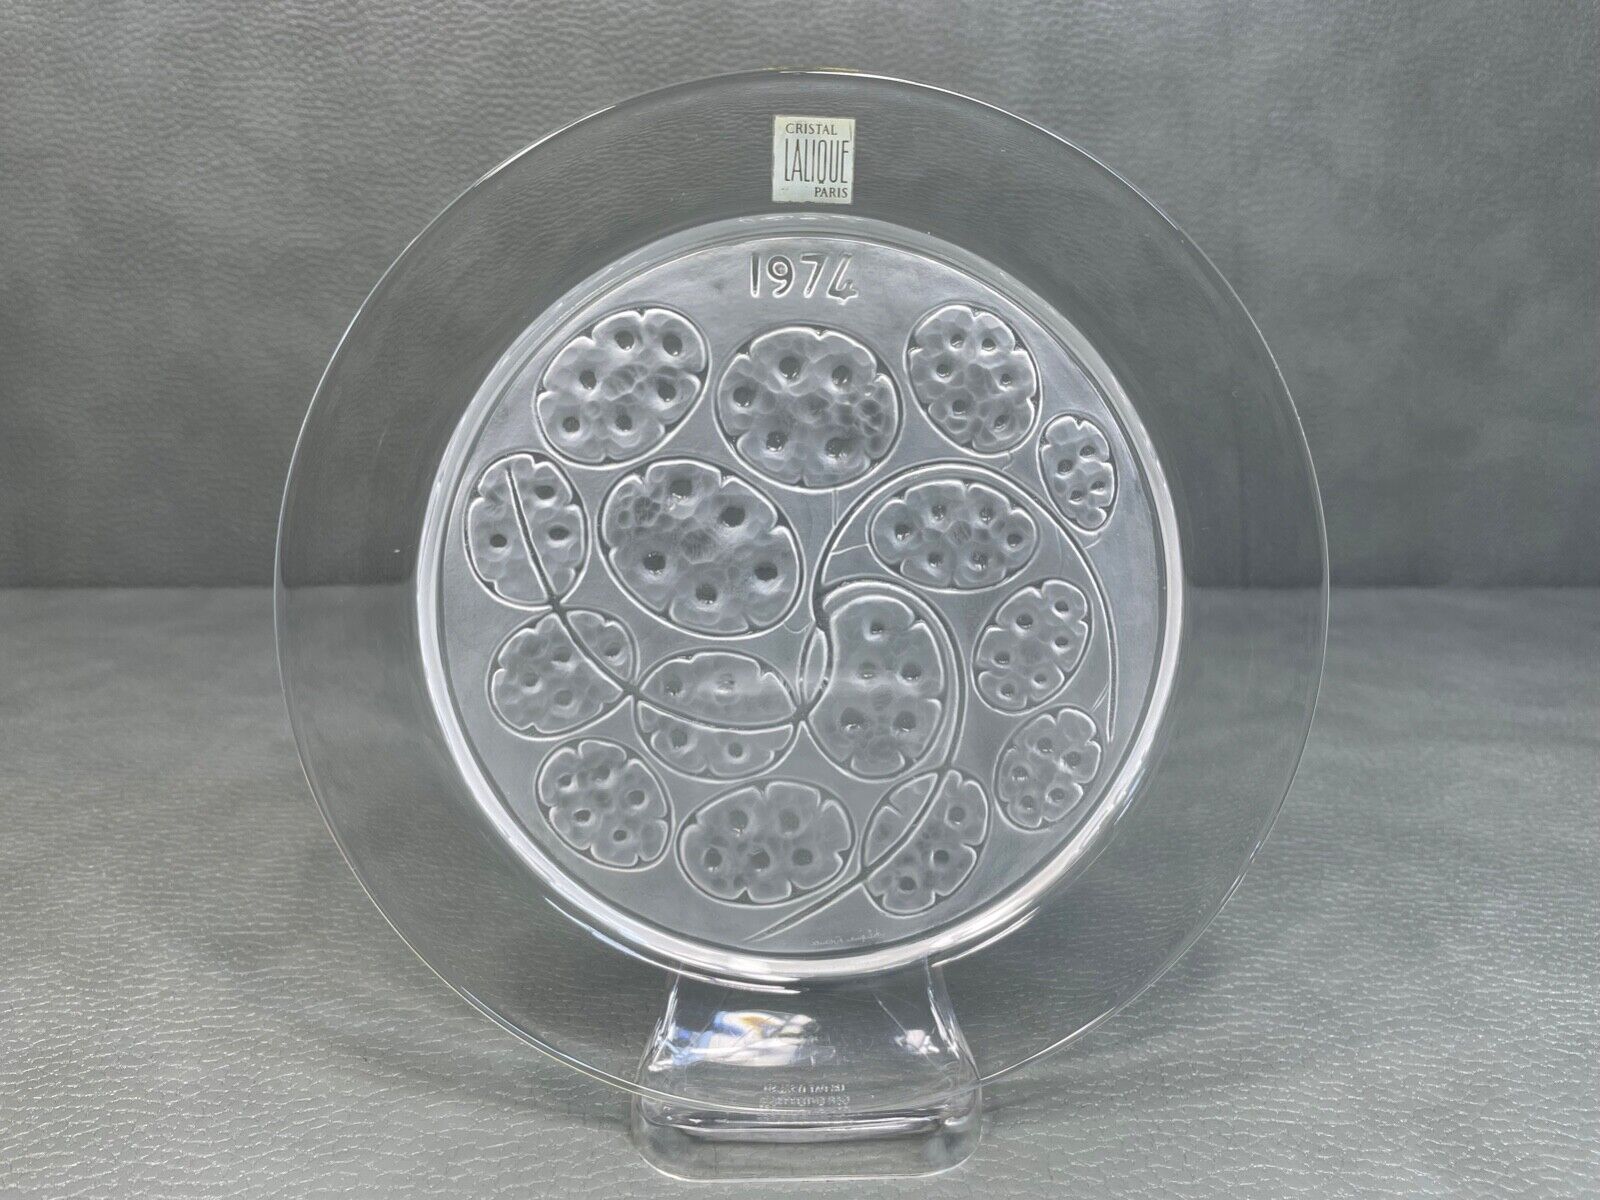 Lalique Crystal of France 1974 Silver Pennies Collector Plate